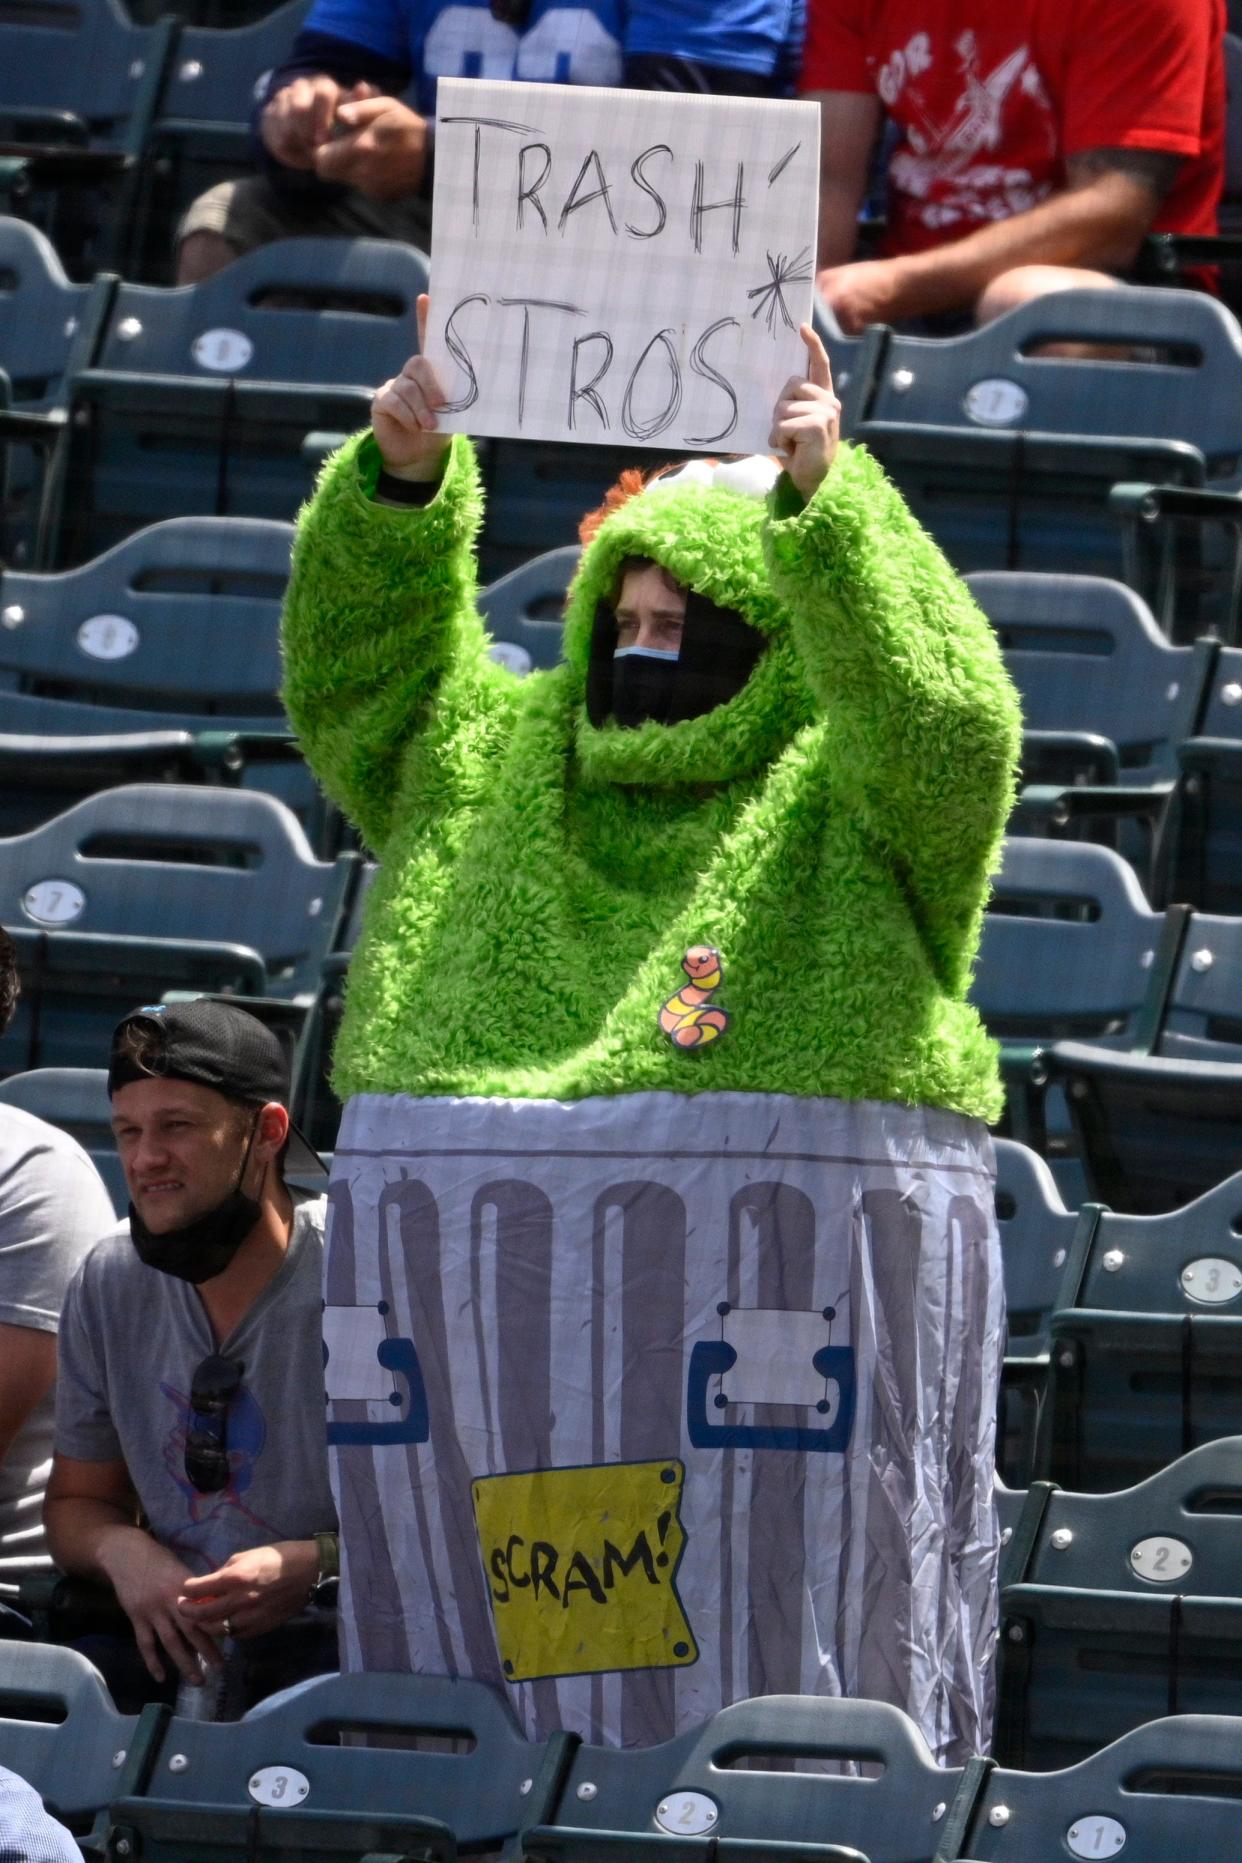 An Angels fan, dressed as Oscar the Grouch, mocks the Astros for banging on trash can lids during their sign-stealing scandal.